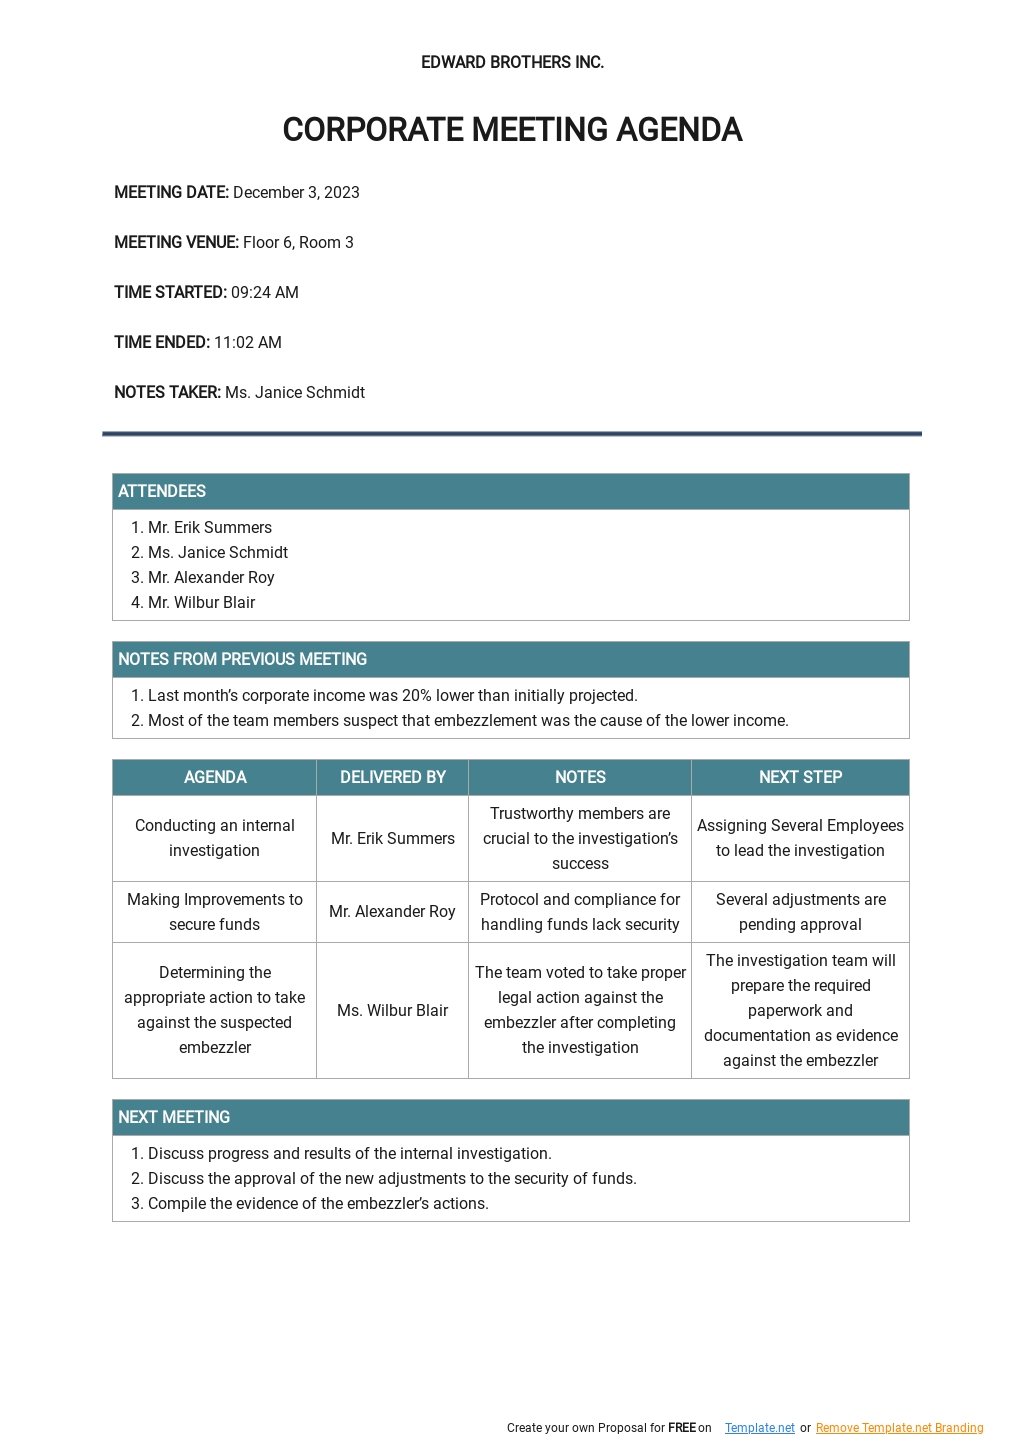 Corporate Meeting Agenda Template Google Docs, Word, Apple Pages